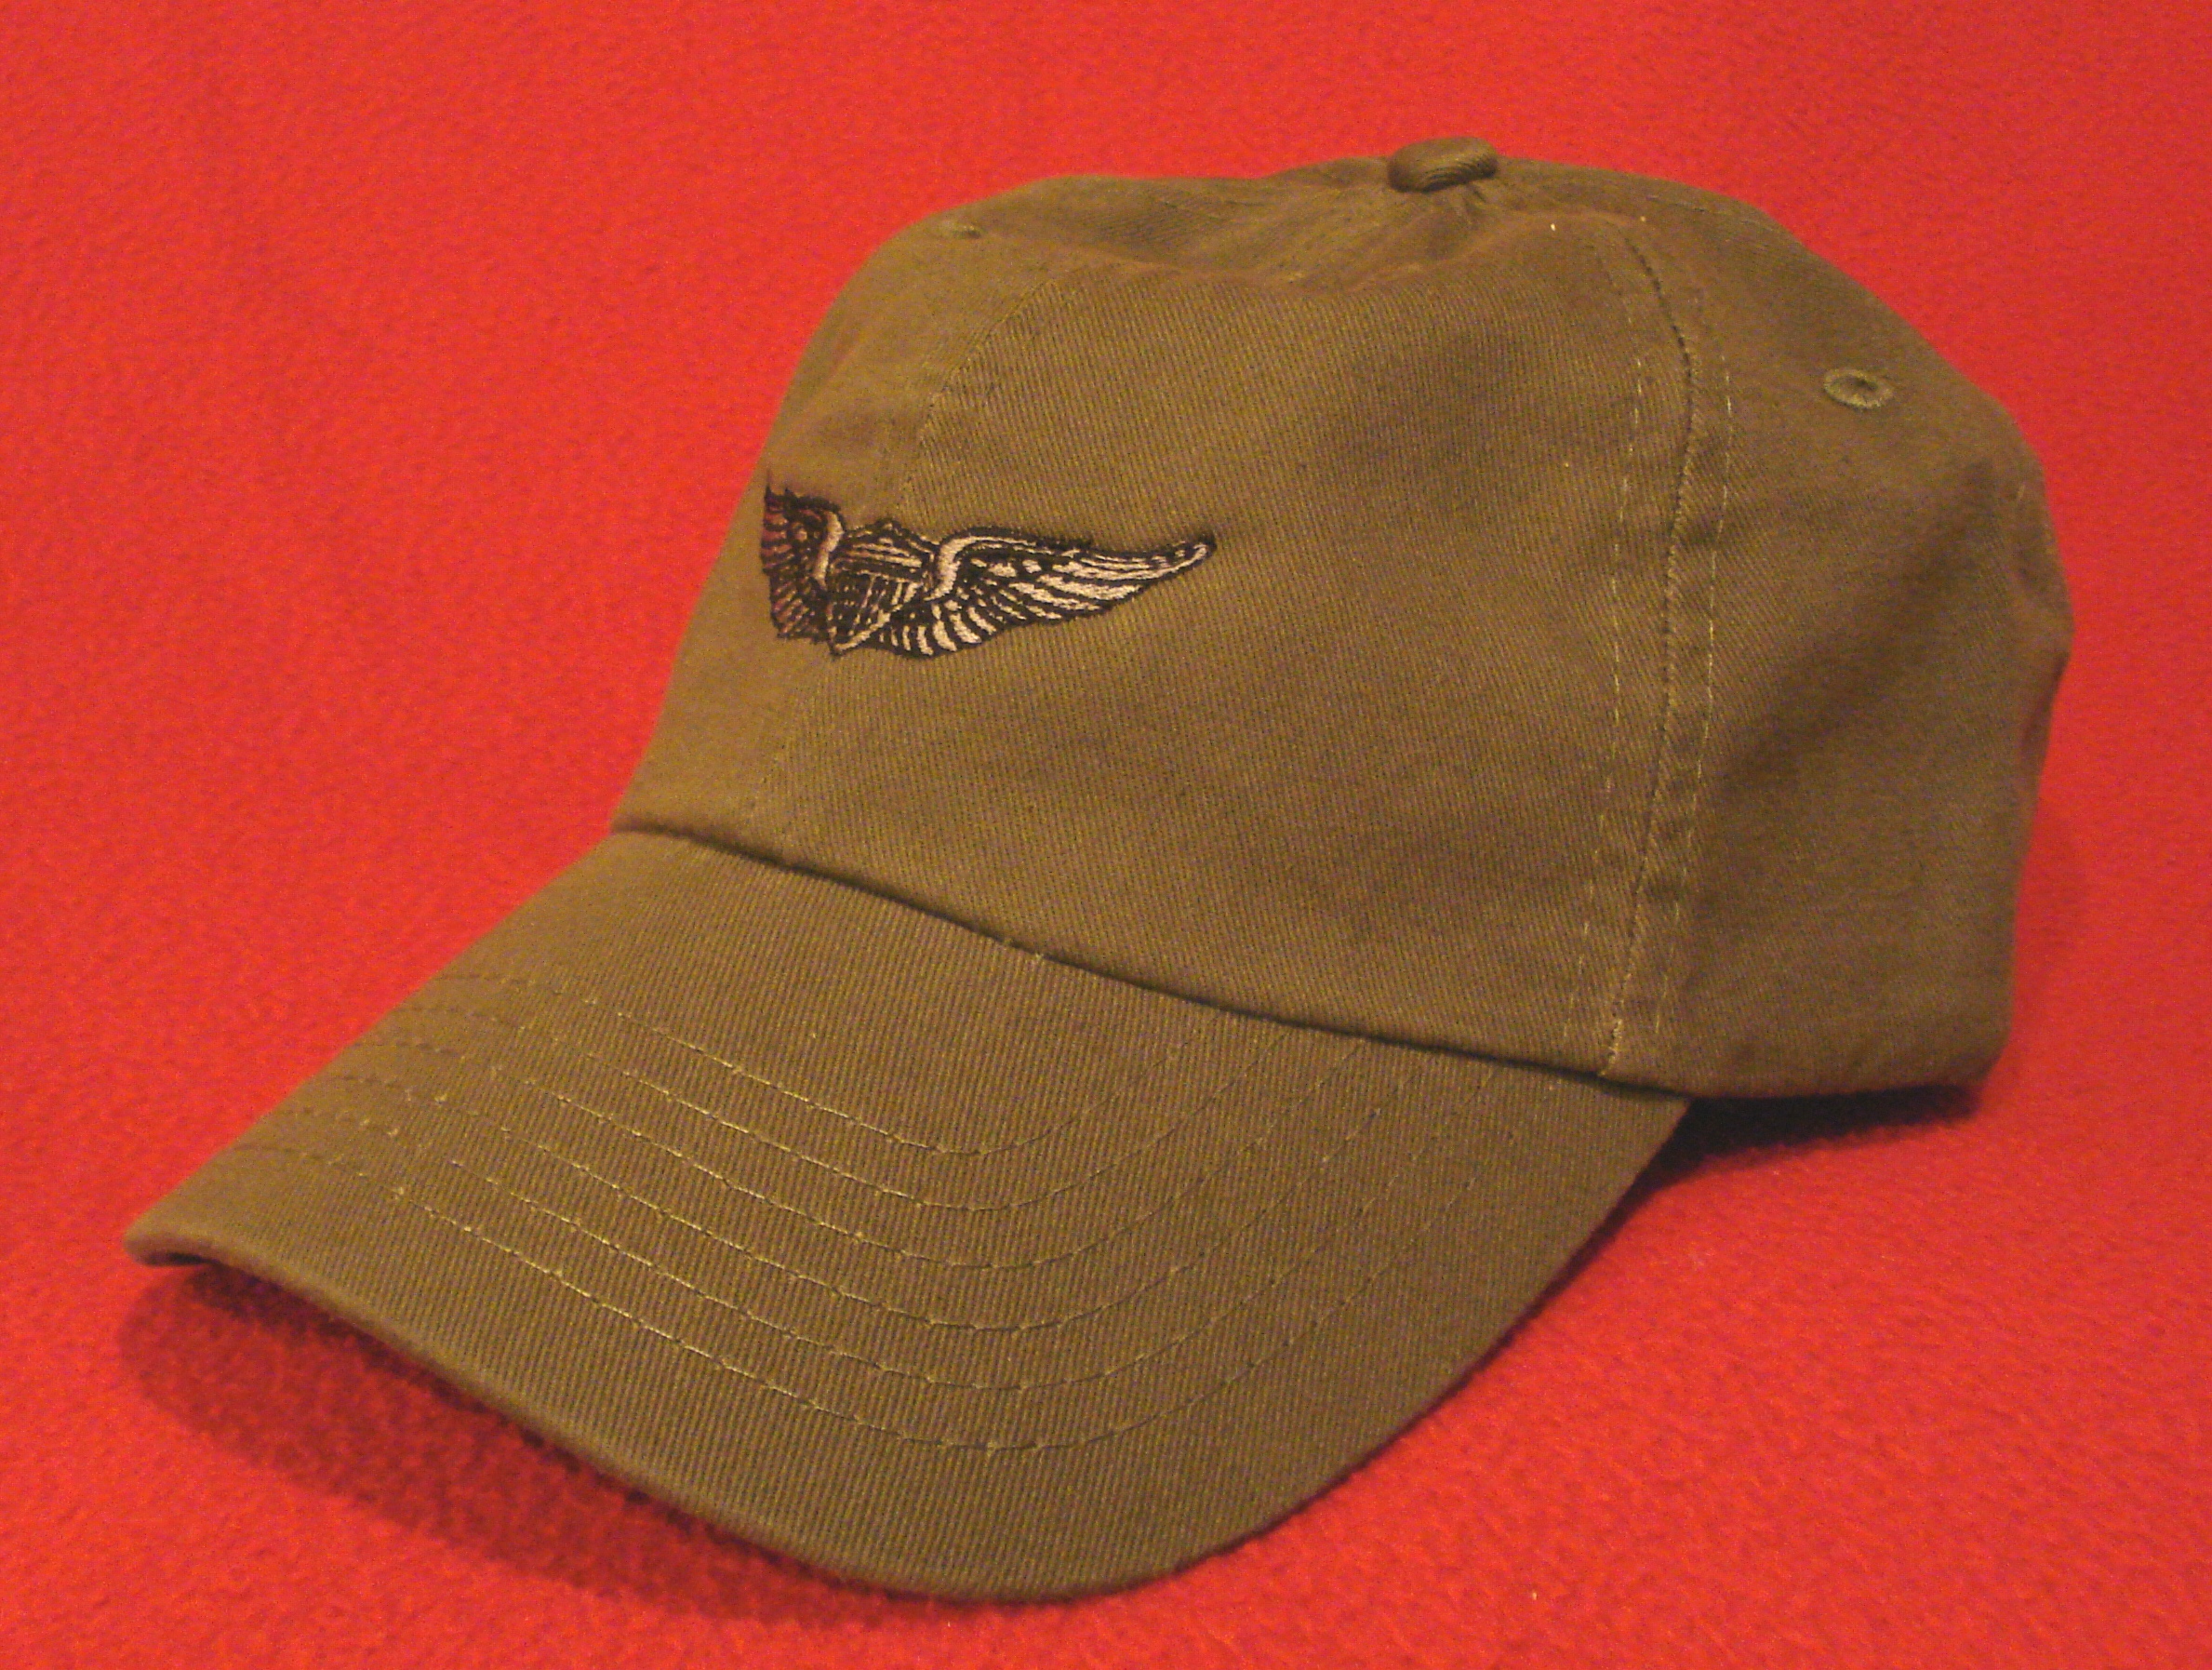 low-profile embroidered hat ARMY AIRCREW Basic Aircrew Wings Ball Cap OD green 